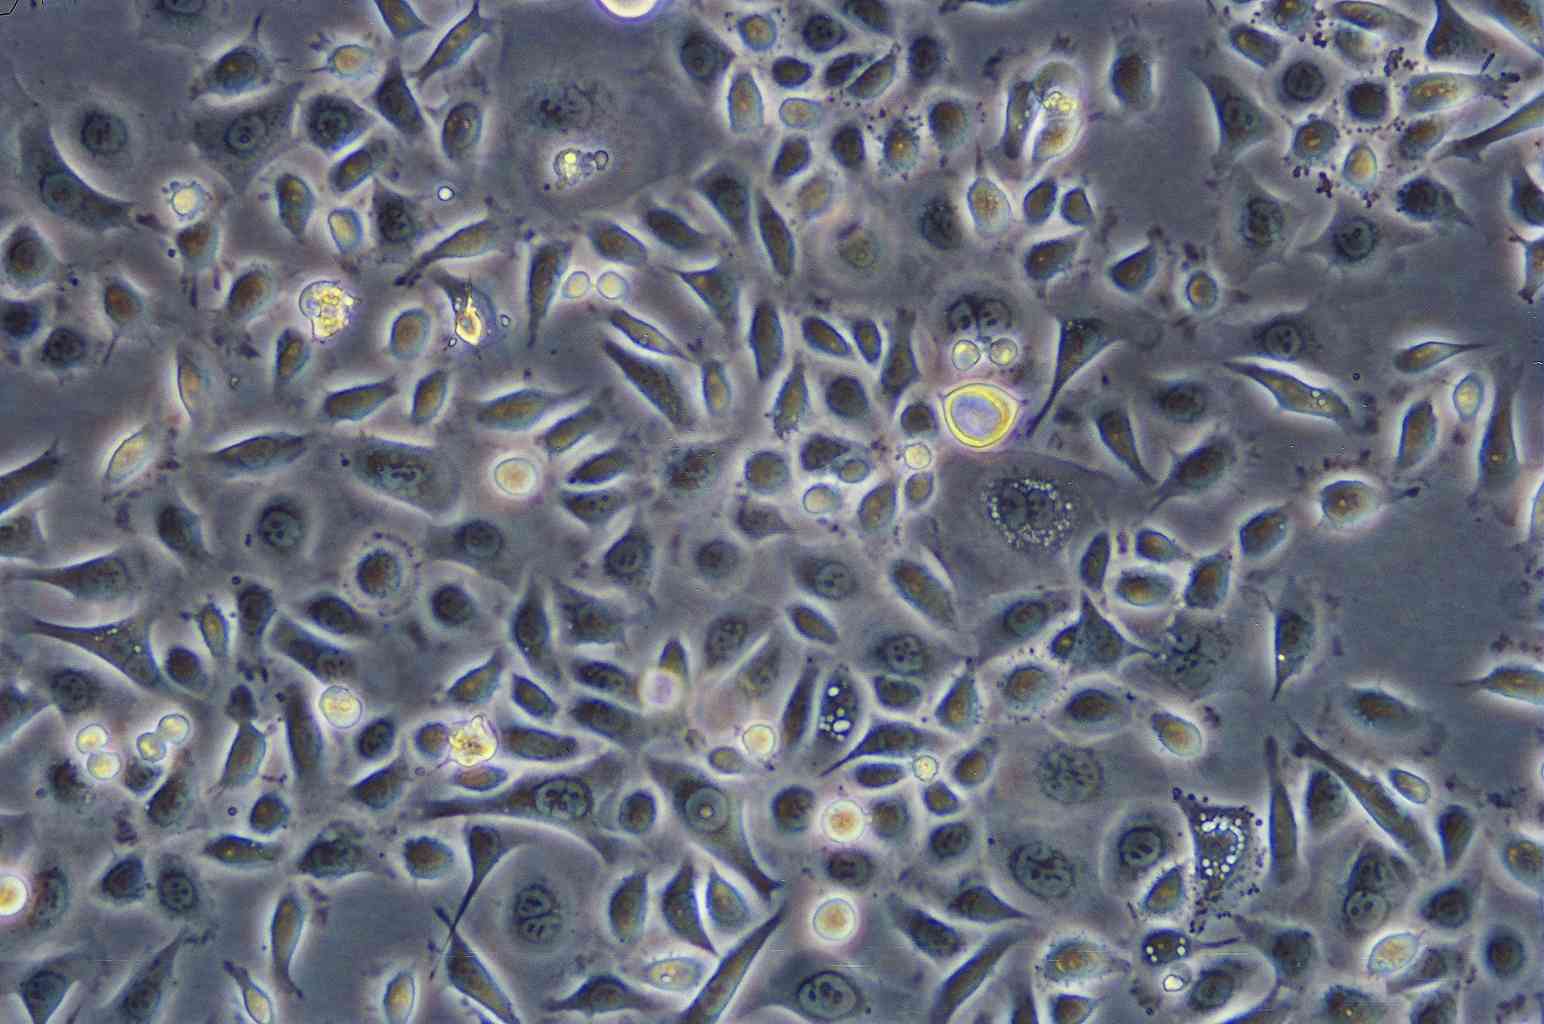 COLO 678 cell line人结肠癌细胞系,COLO 678 cell line